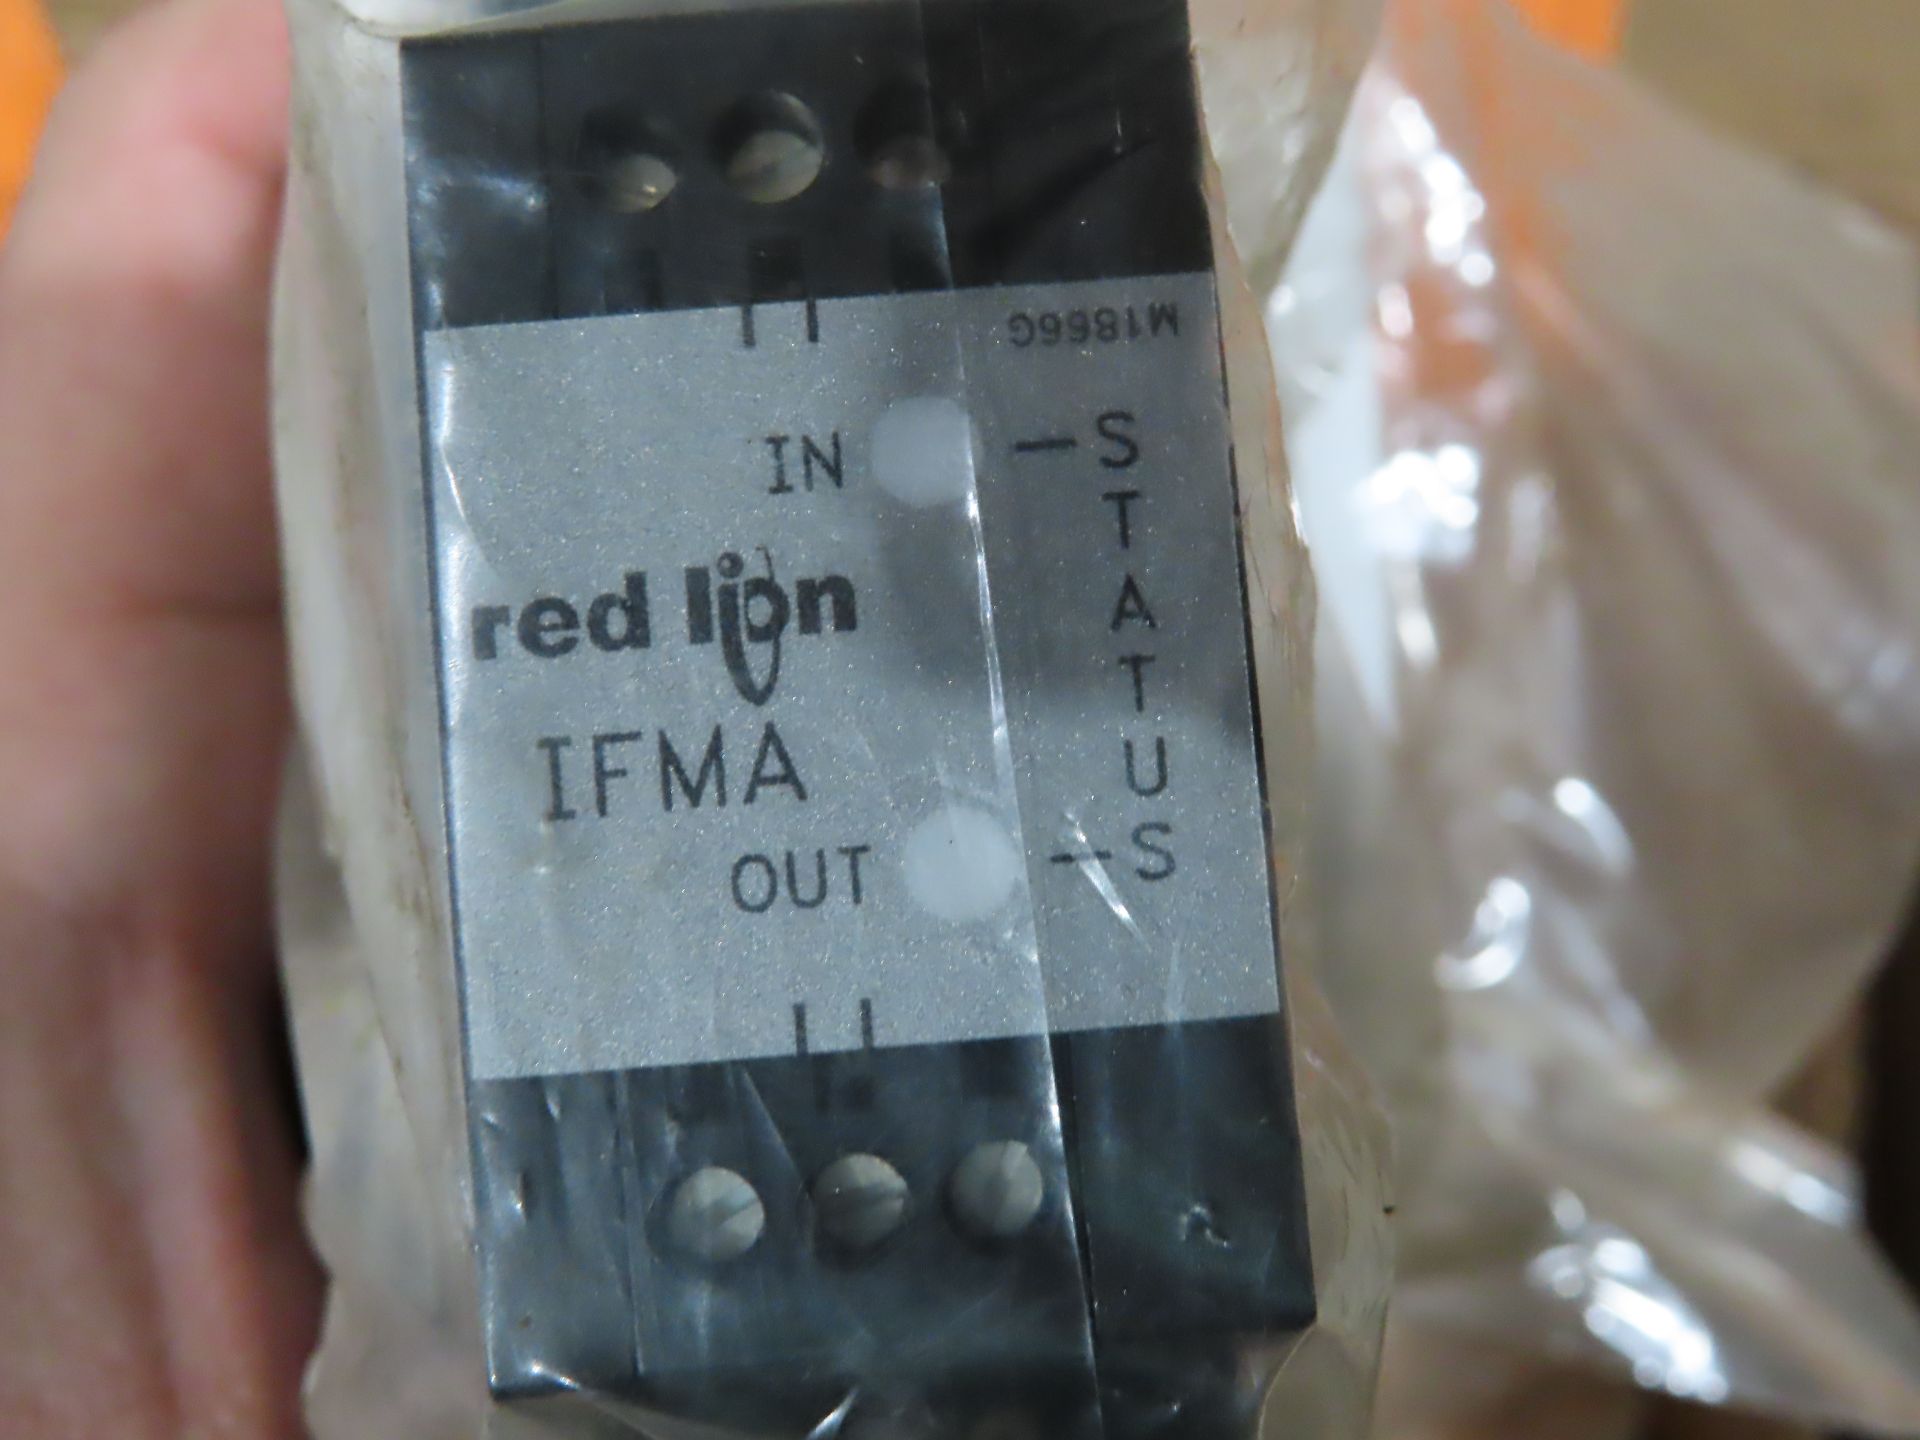 Qty 2 Red Lion model IFMA-0065, new in package as pictured, as always with Brolyn LLC auctions, - Image 2 of 2